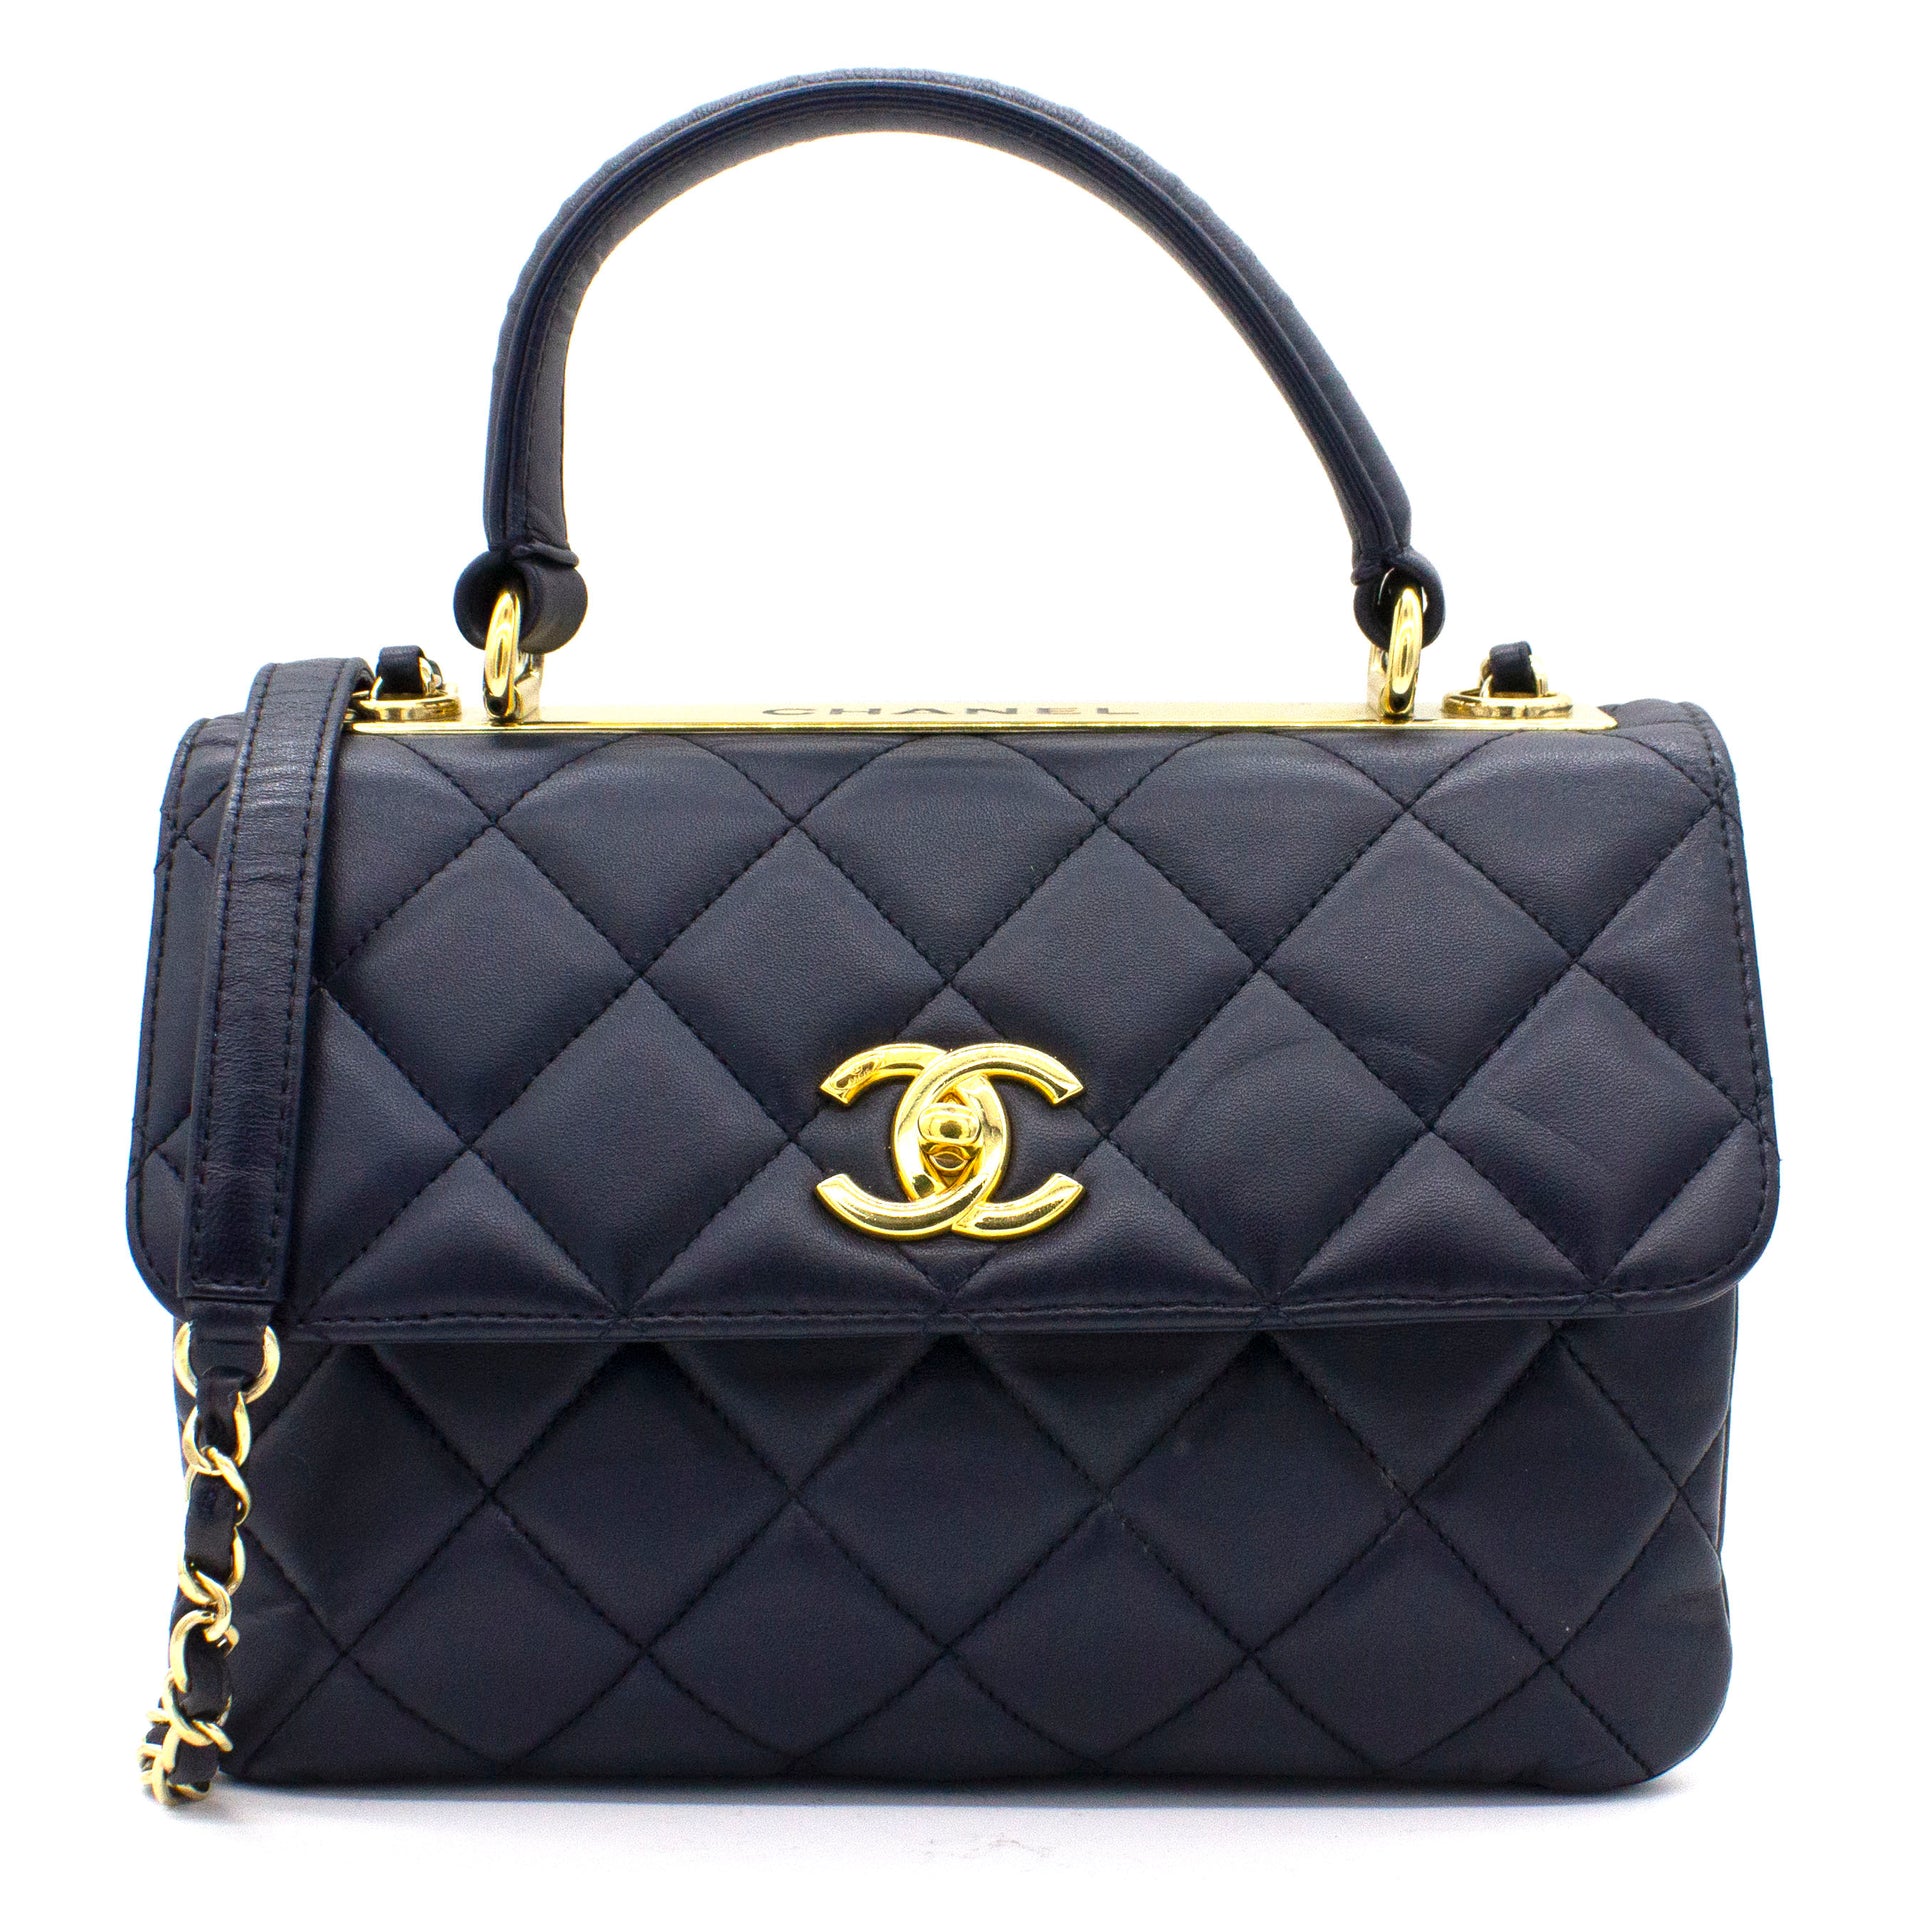 Chanel Black Quilted Lambskin Leather Small Trendy CC Flap Top Handle Bag  Chanel